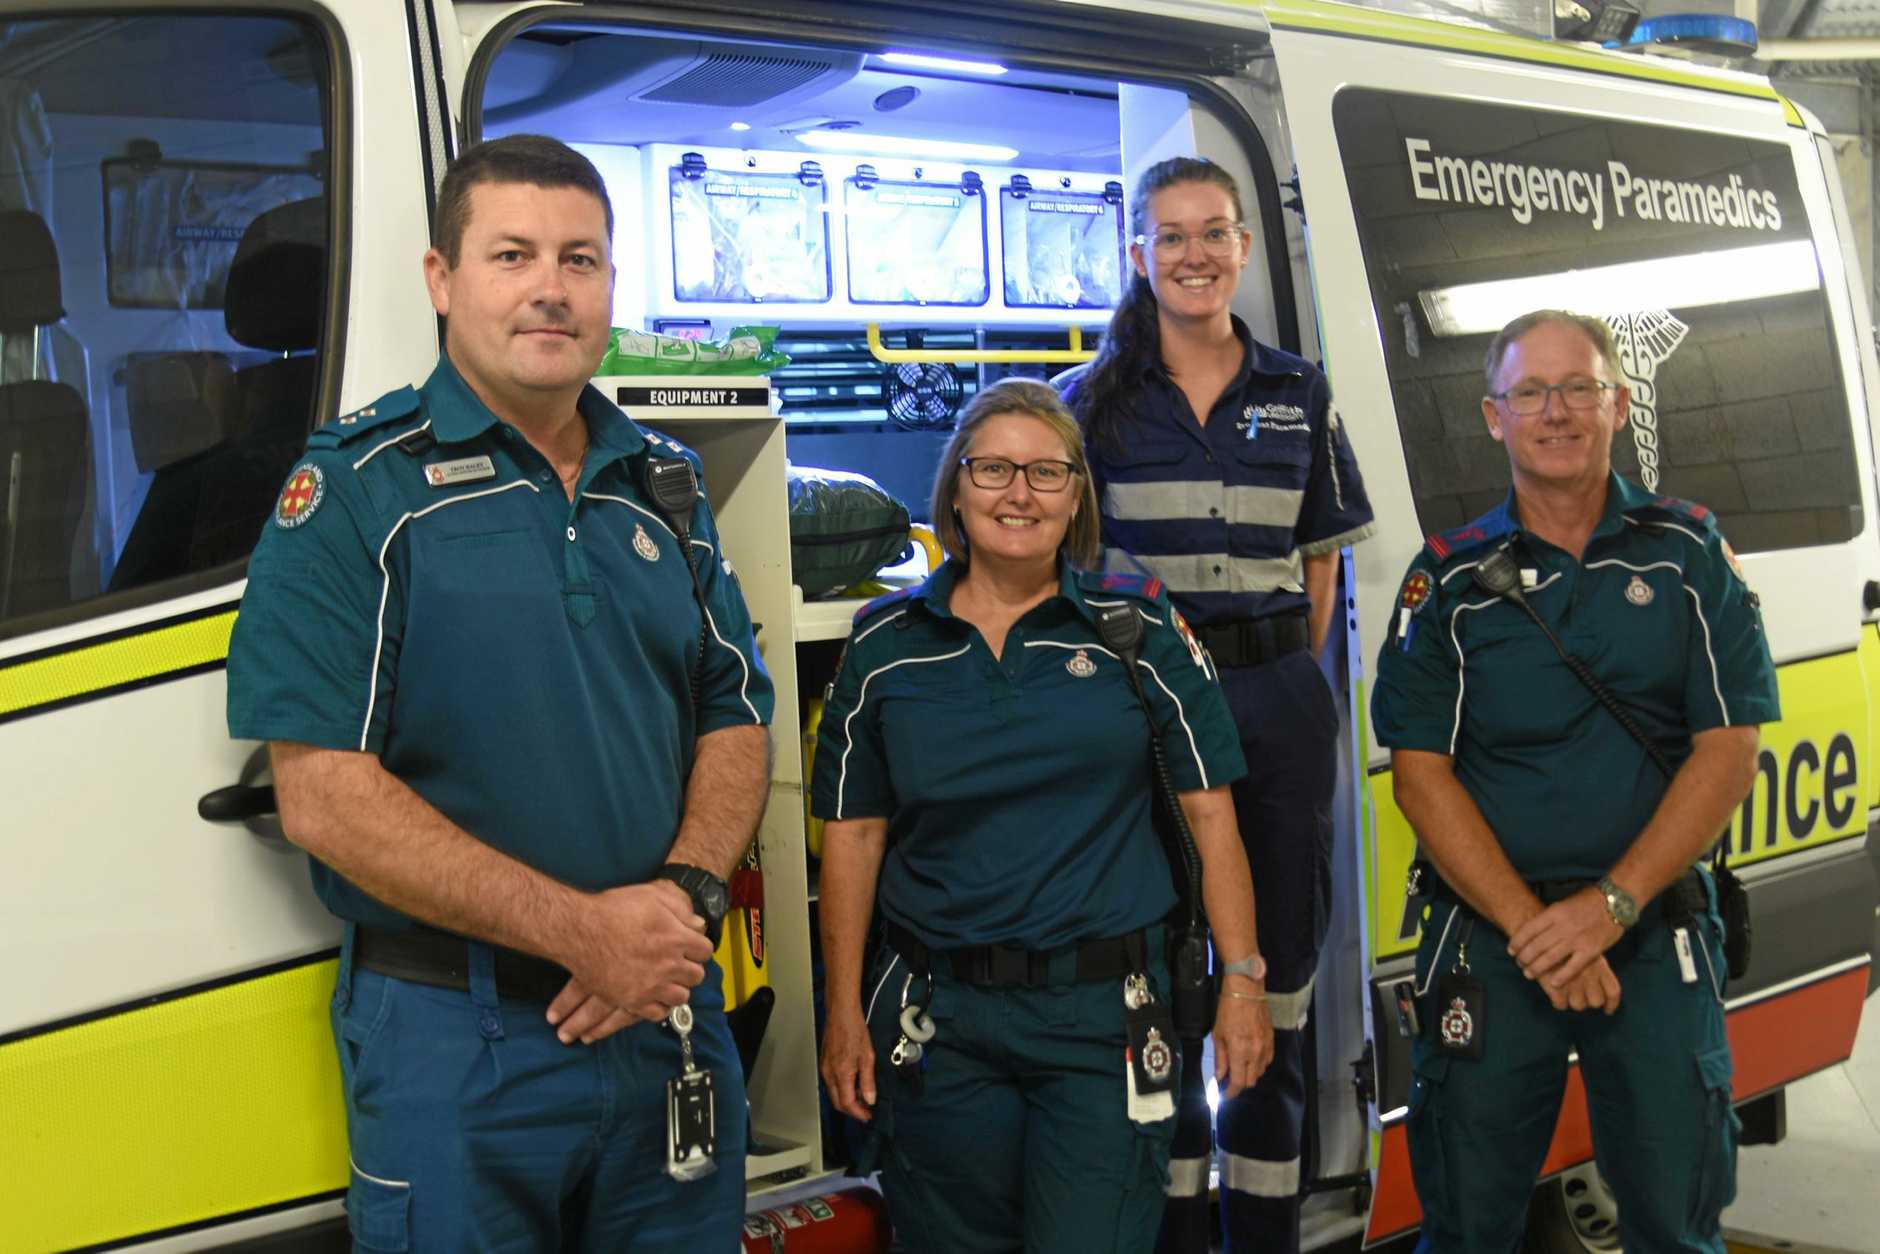 United Workers Union Queensland - Ambulance Active